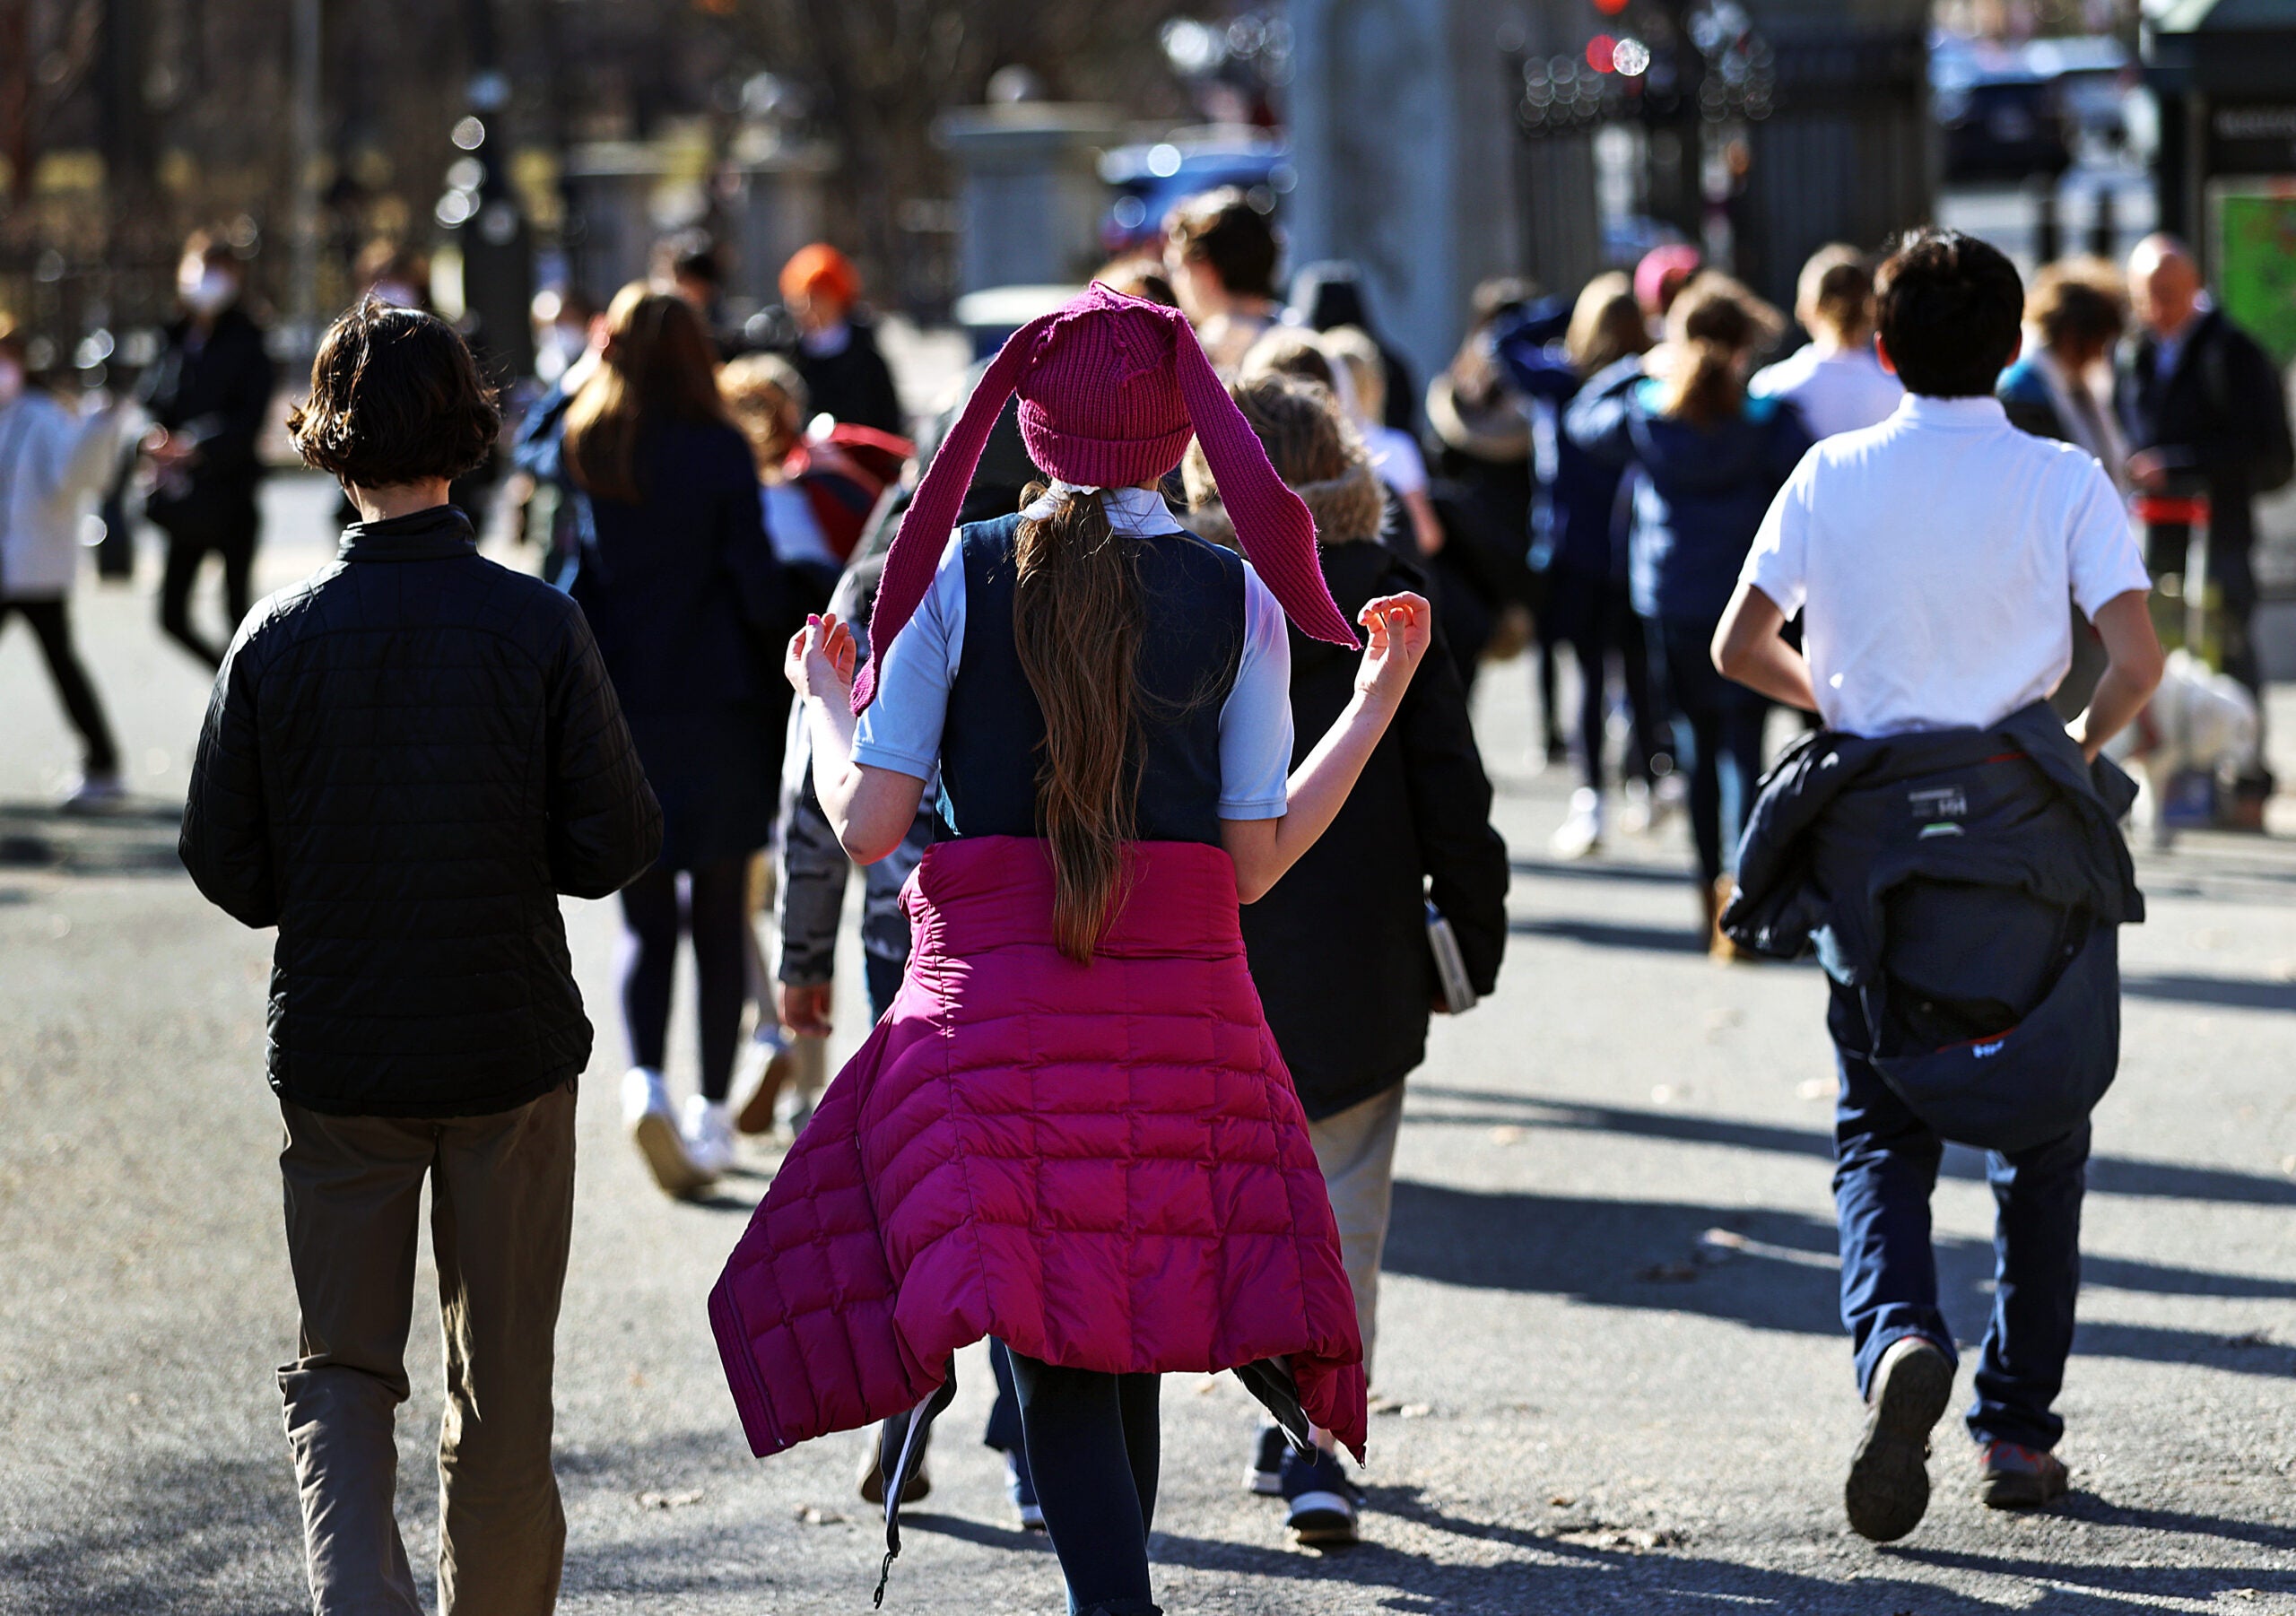 A student walks back to class after recess at the Boston Common